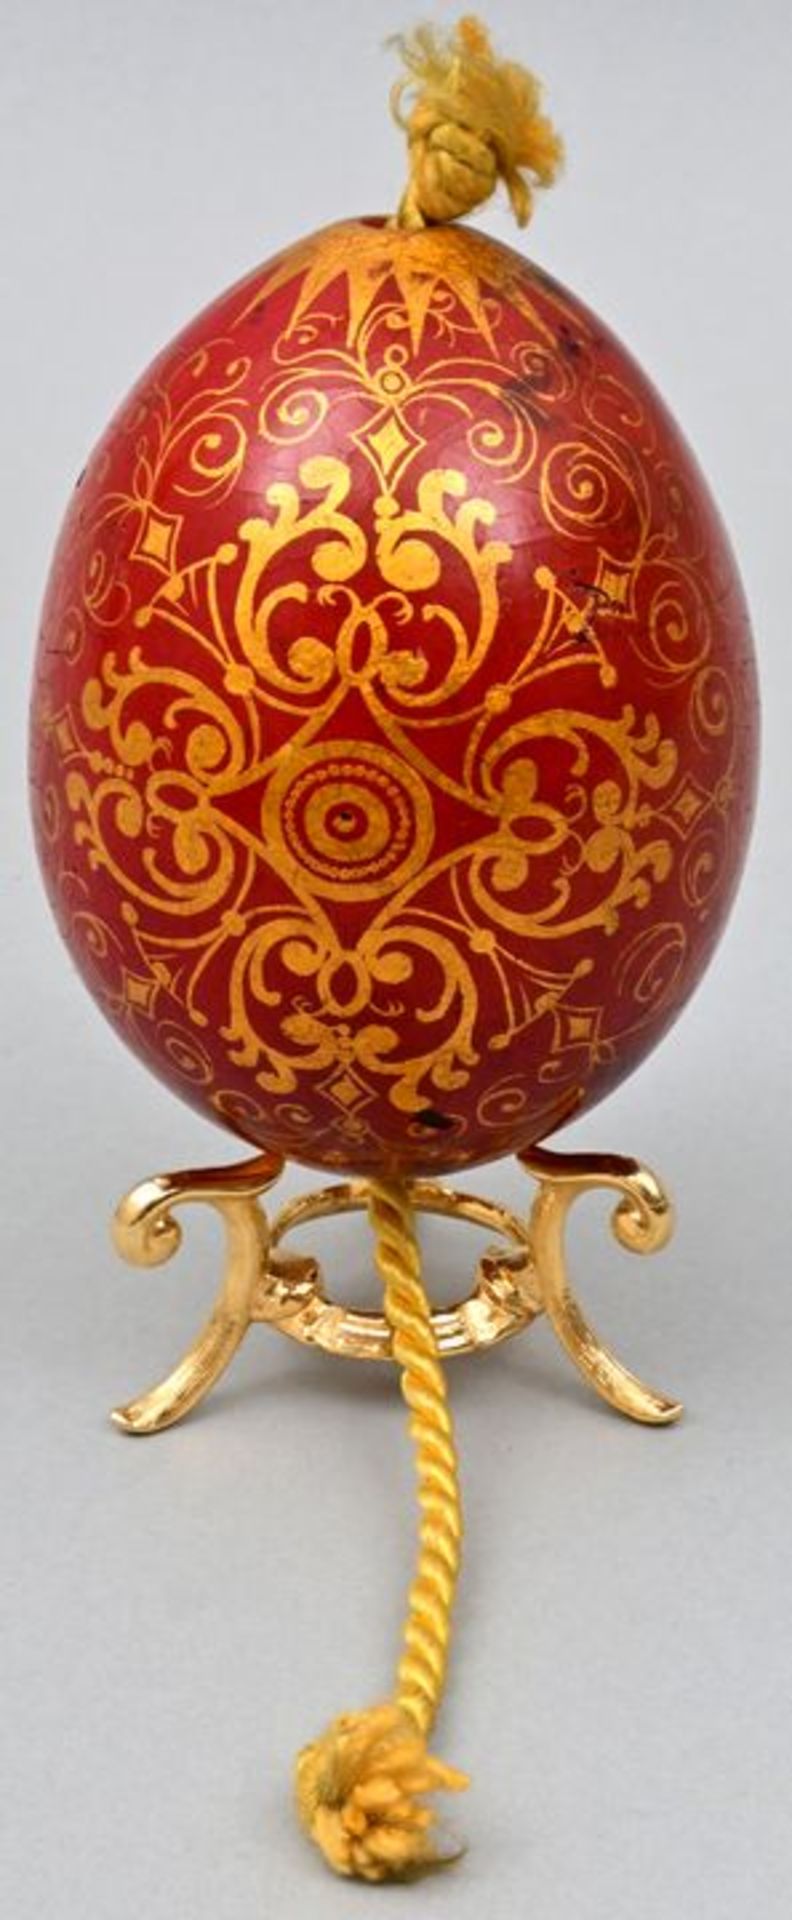 Osterei, Russland / Easter Egg - Image 2 of 3